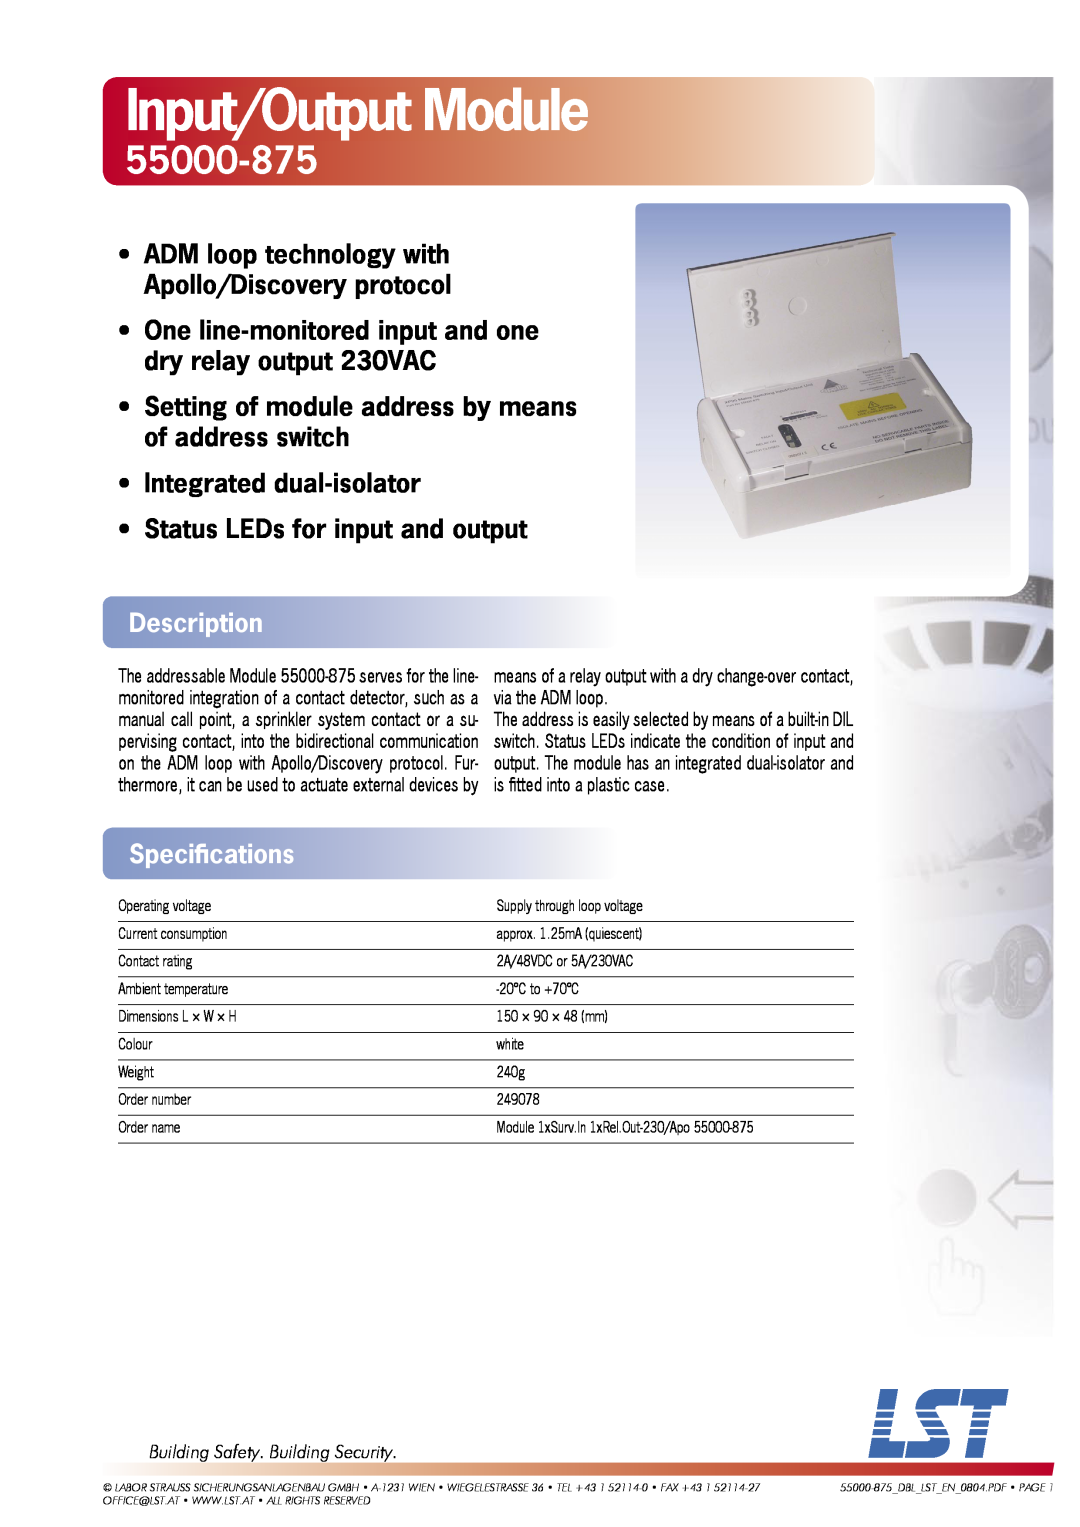 LST 55000-875 specifications Input/Output Module, One line-monitored input and one dry relay output 230VAC, Description 